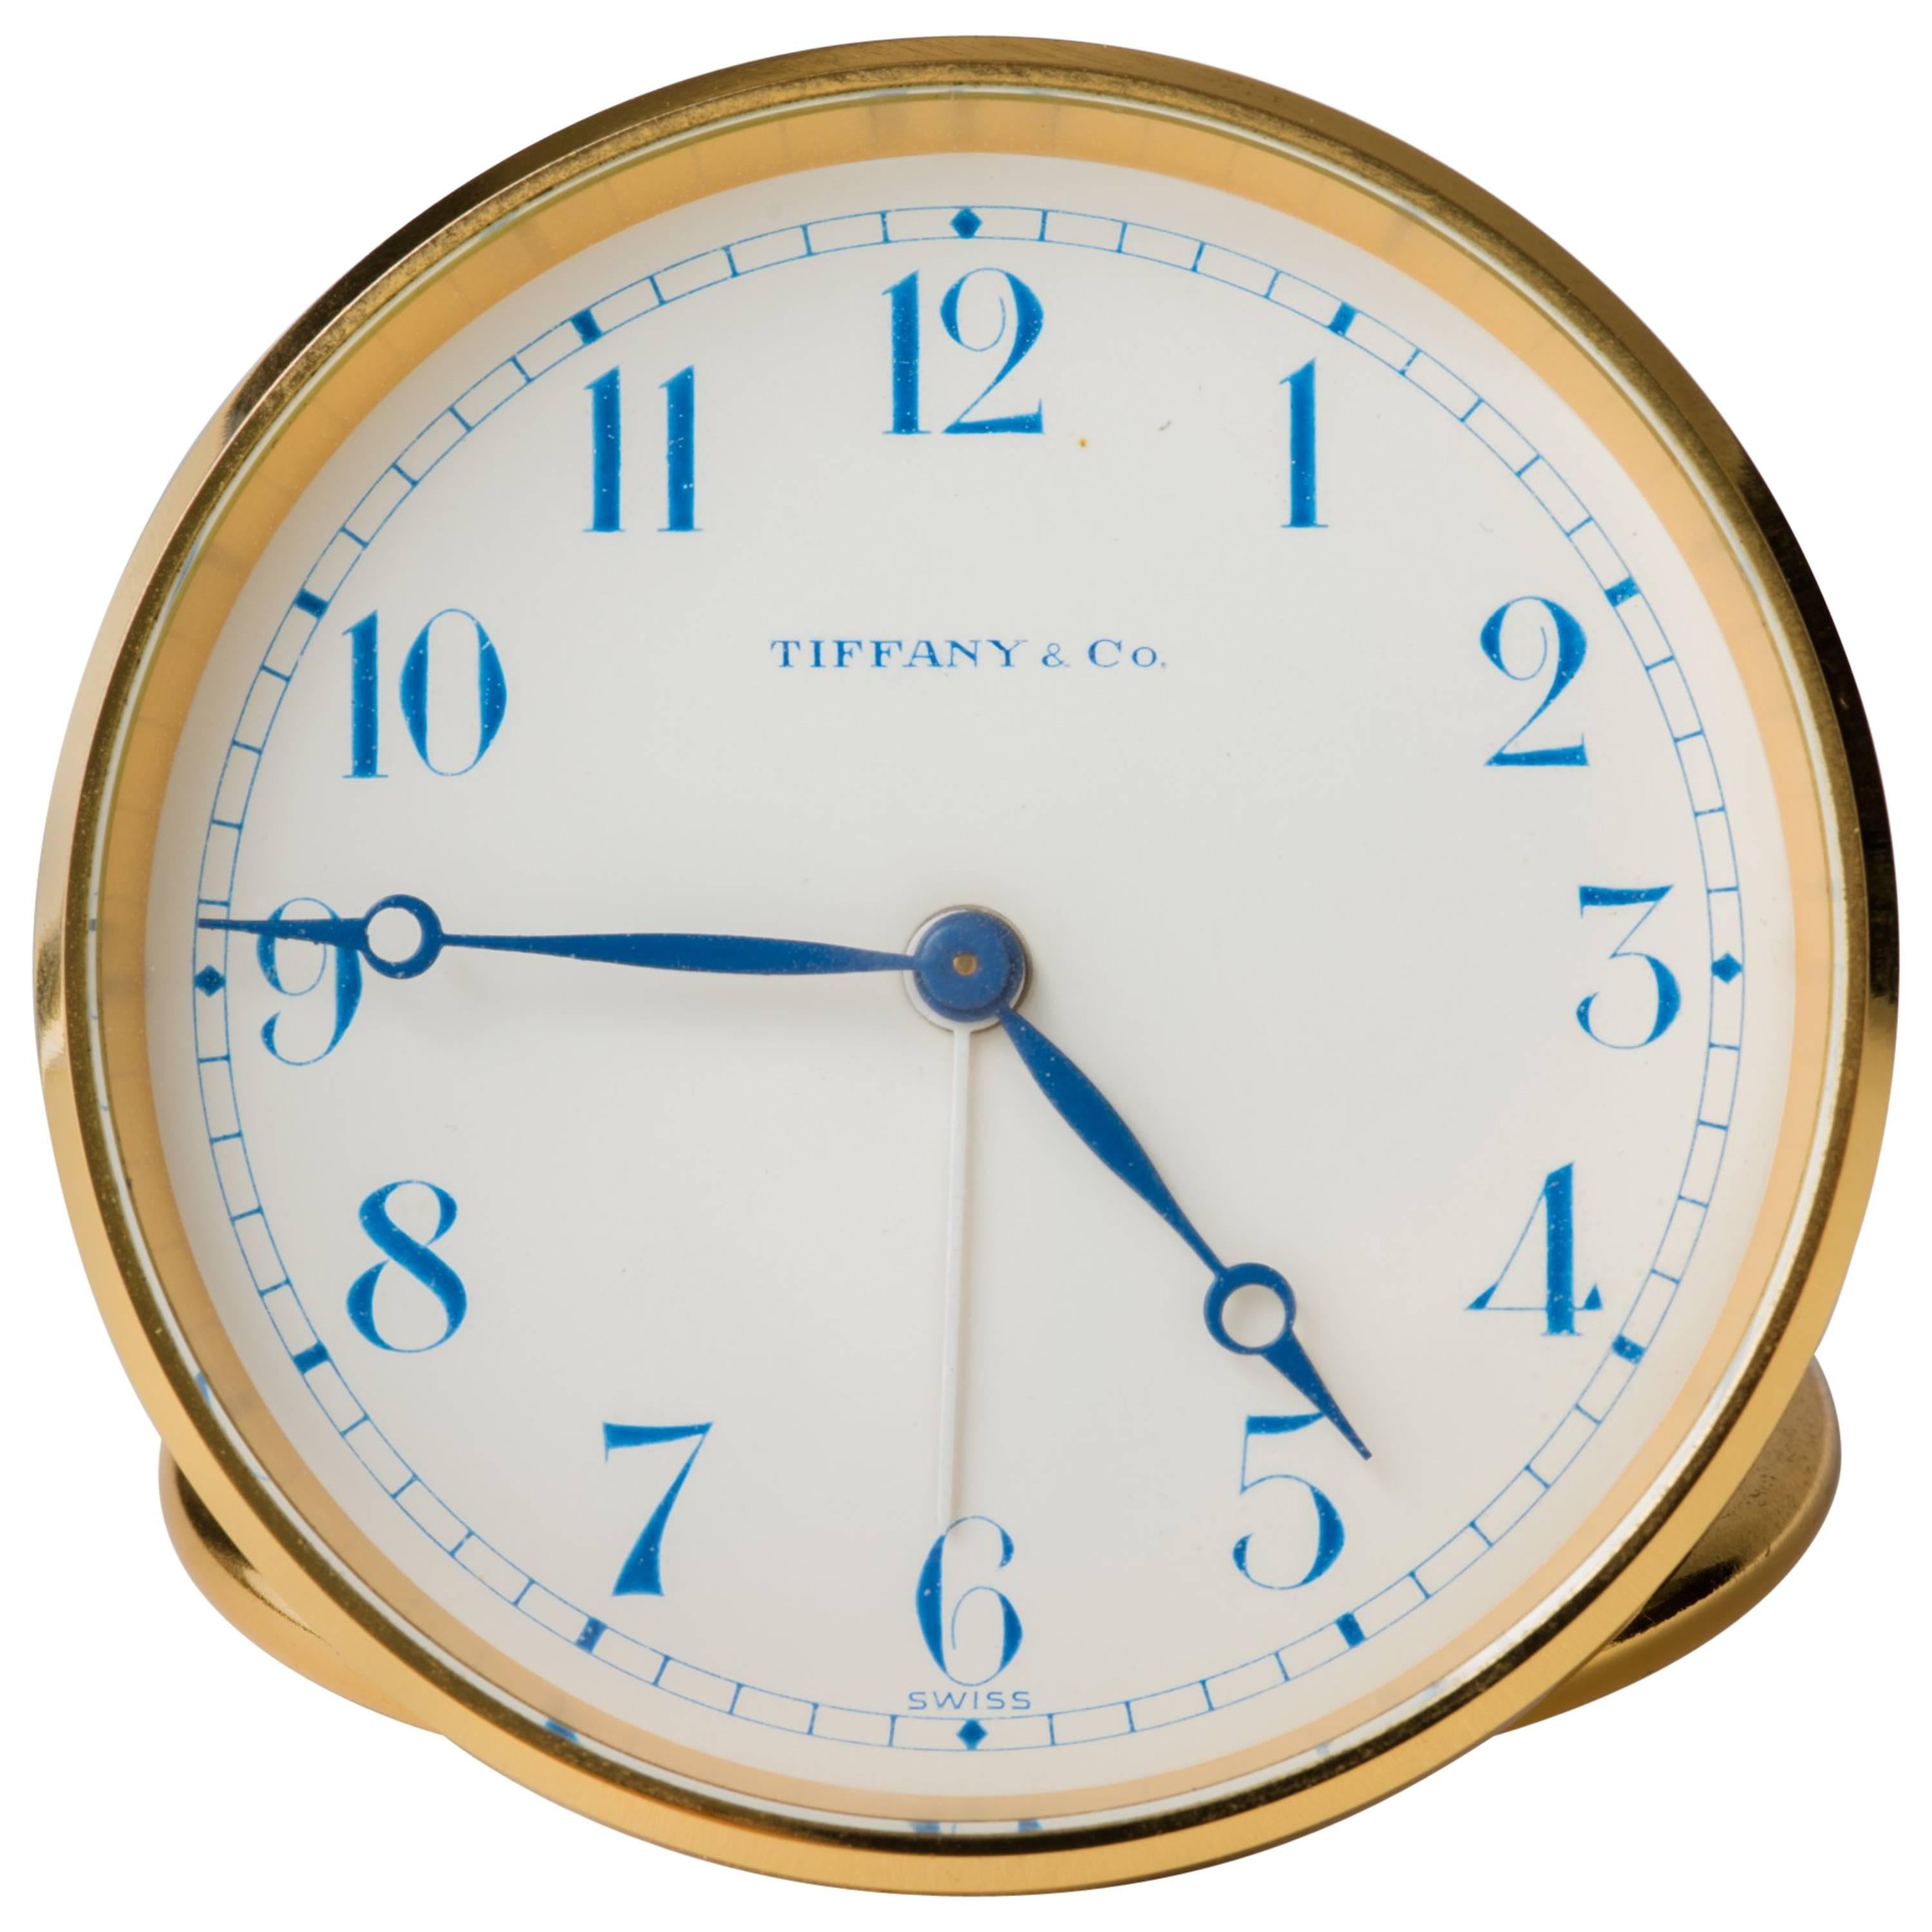 Tiffany Swiss Travel Clock with Leather Case